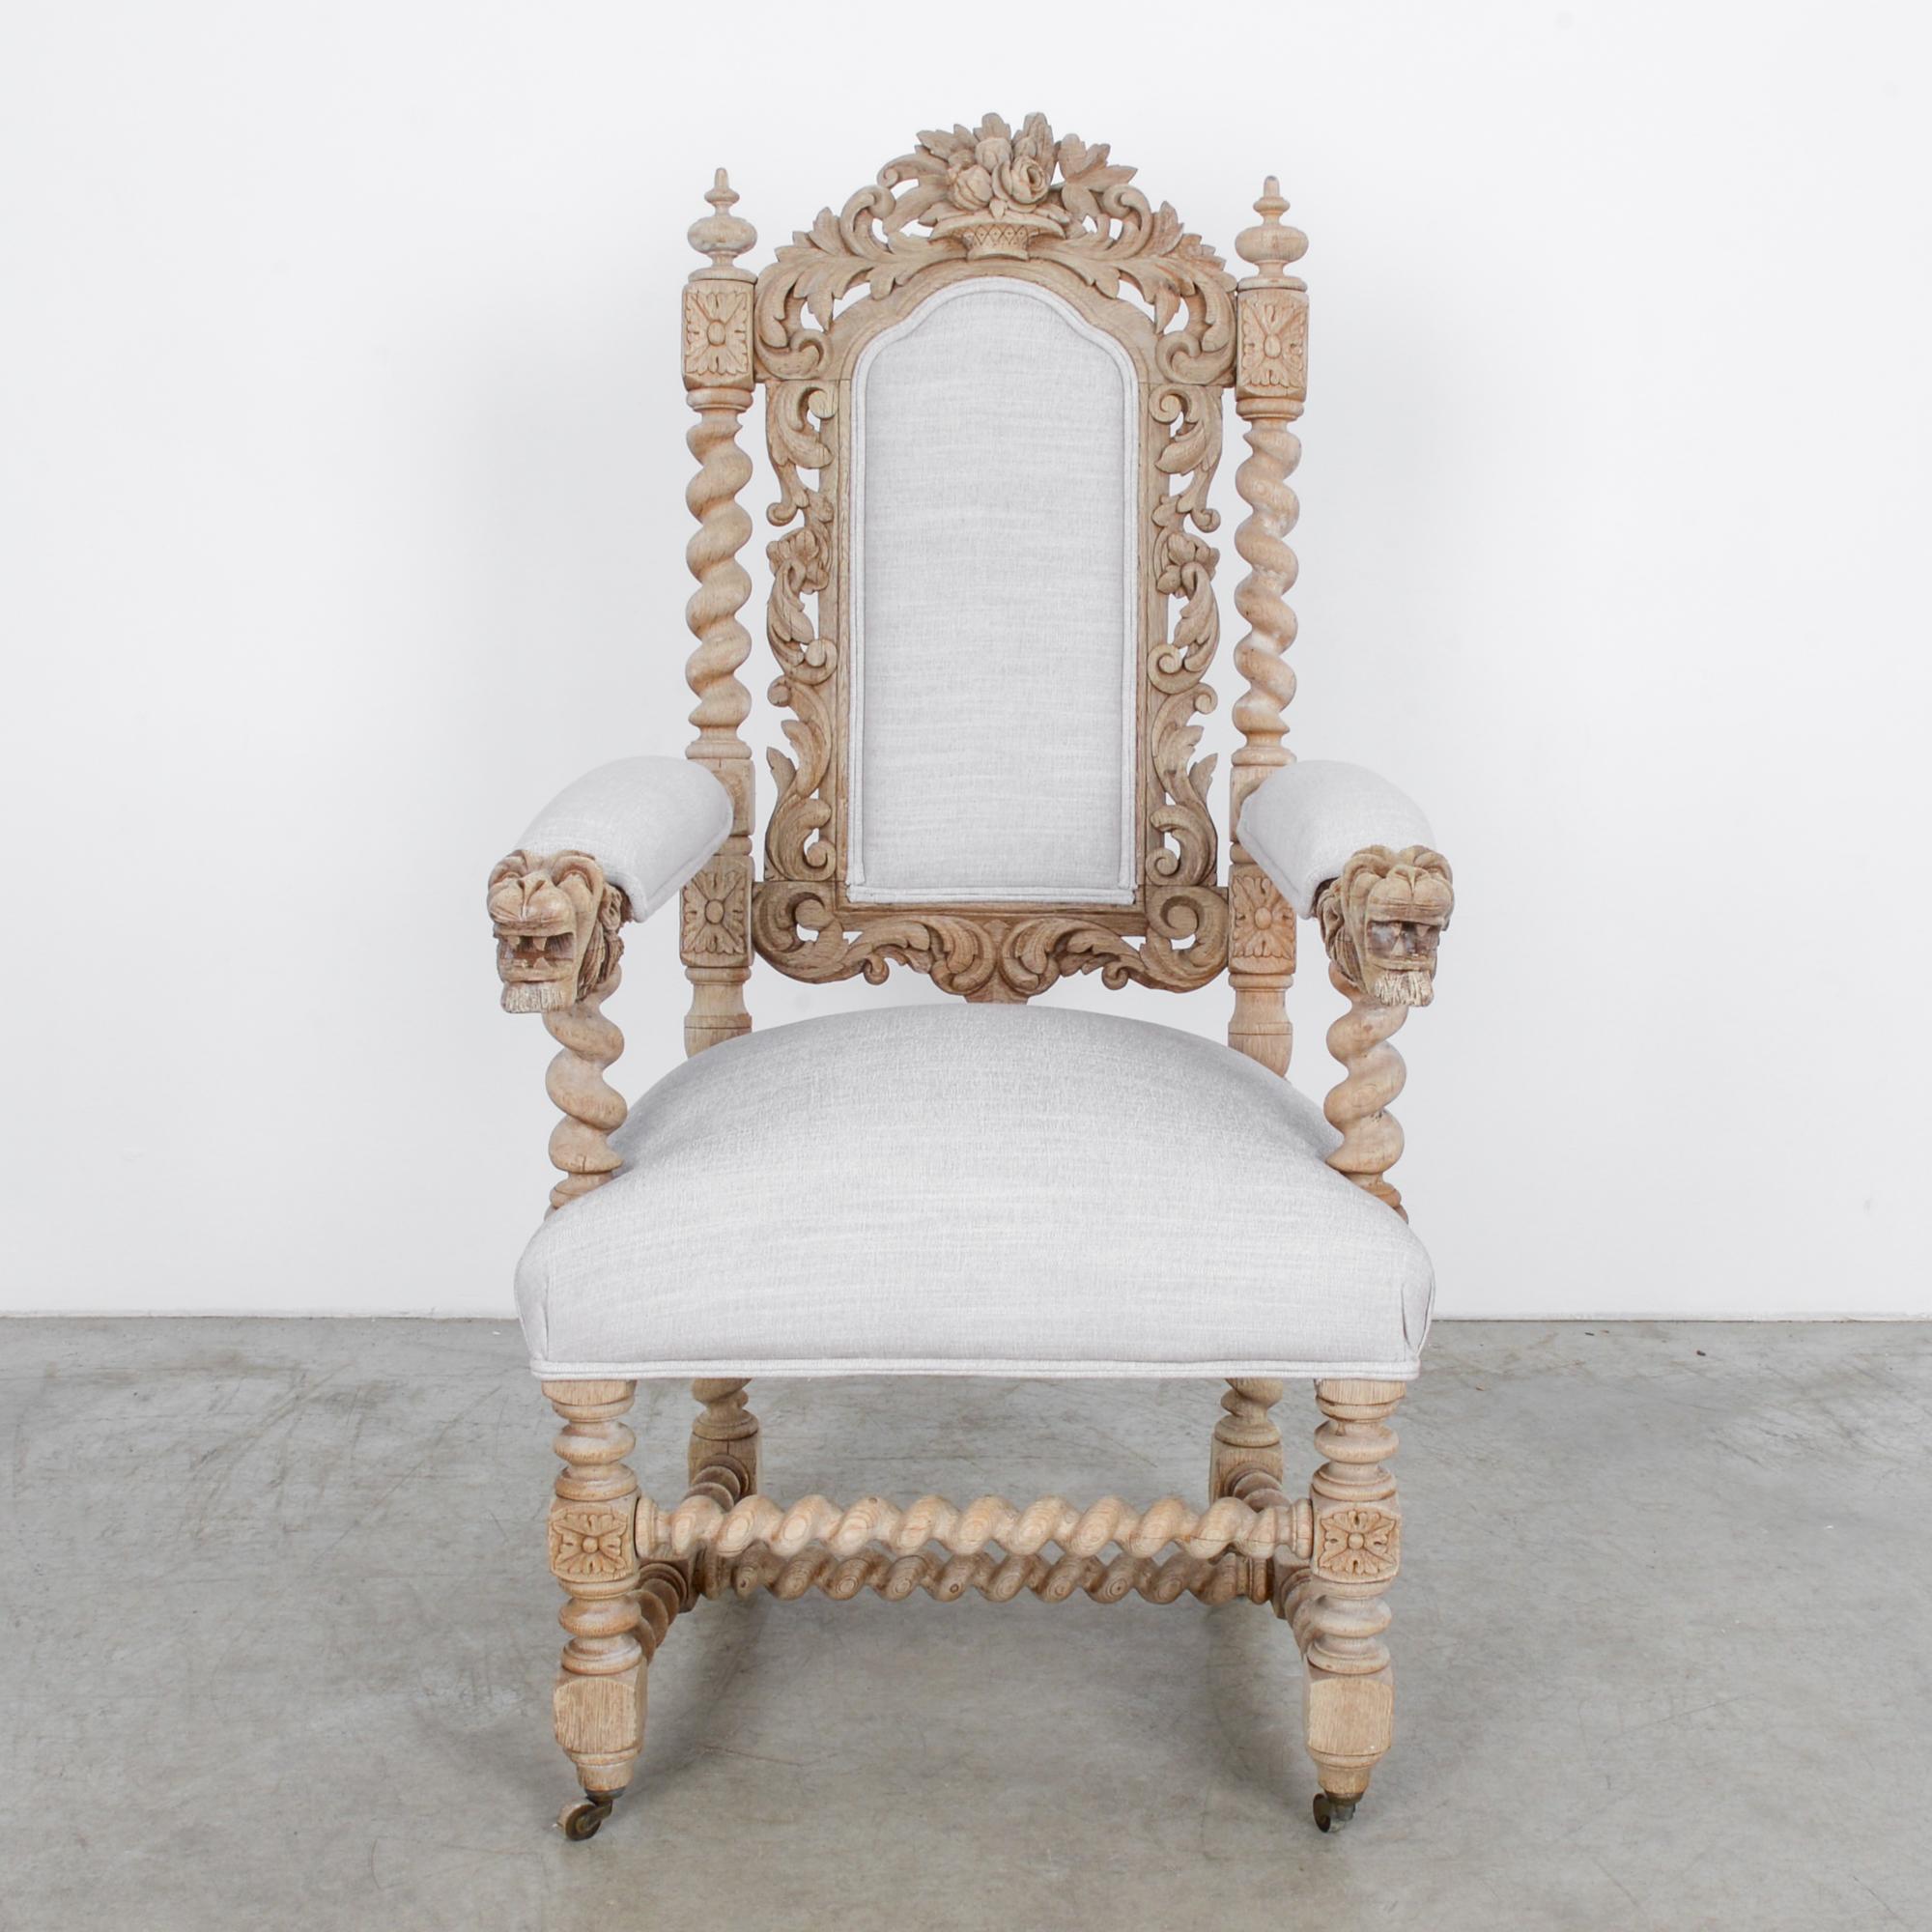 This wooden armchair with an upholstered seat, backrest, and armrests was made in Belgium, circa 1900. A combination of elaborate ornamentation and superior craftsmanship makes this a truly remarkable piece. Ornately carved with Flemish influence,